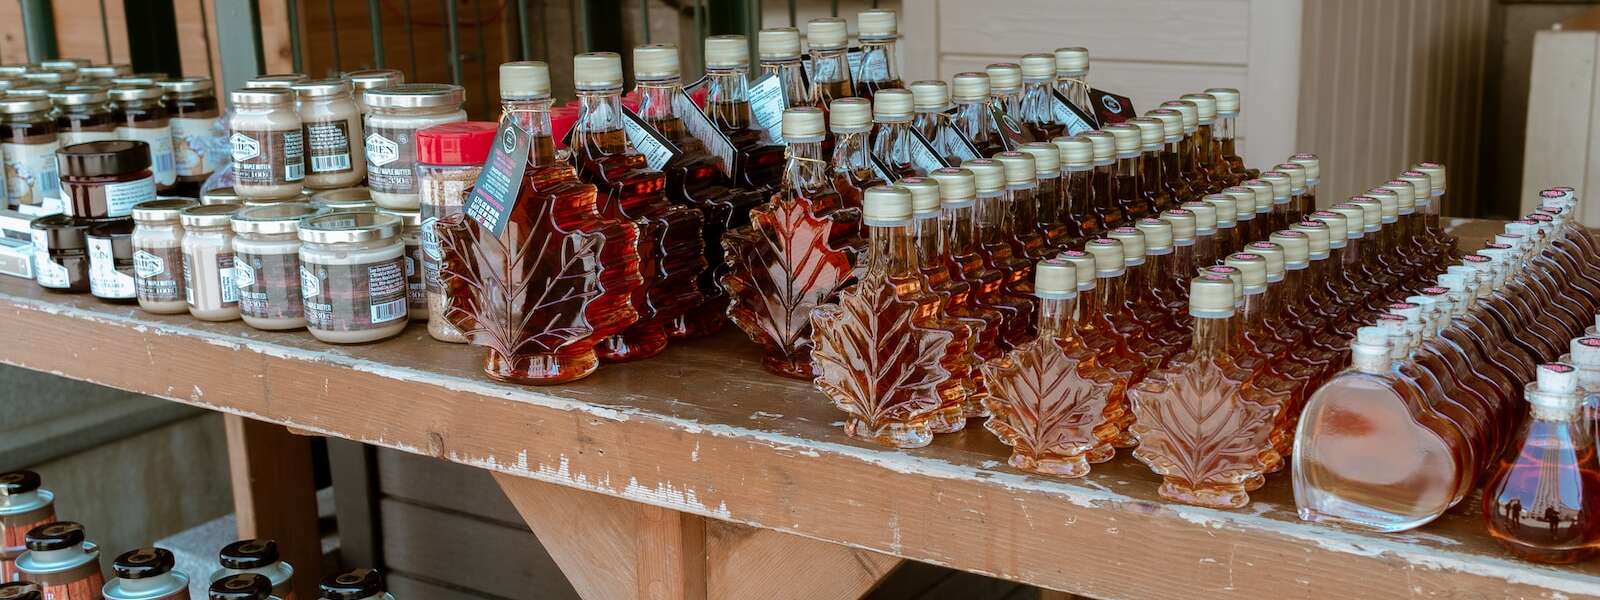 assorted glass bottles of maple syrup on wooden shelves